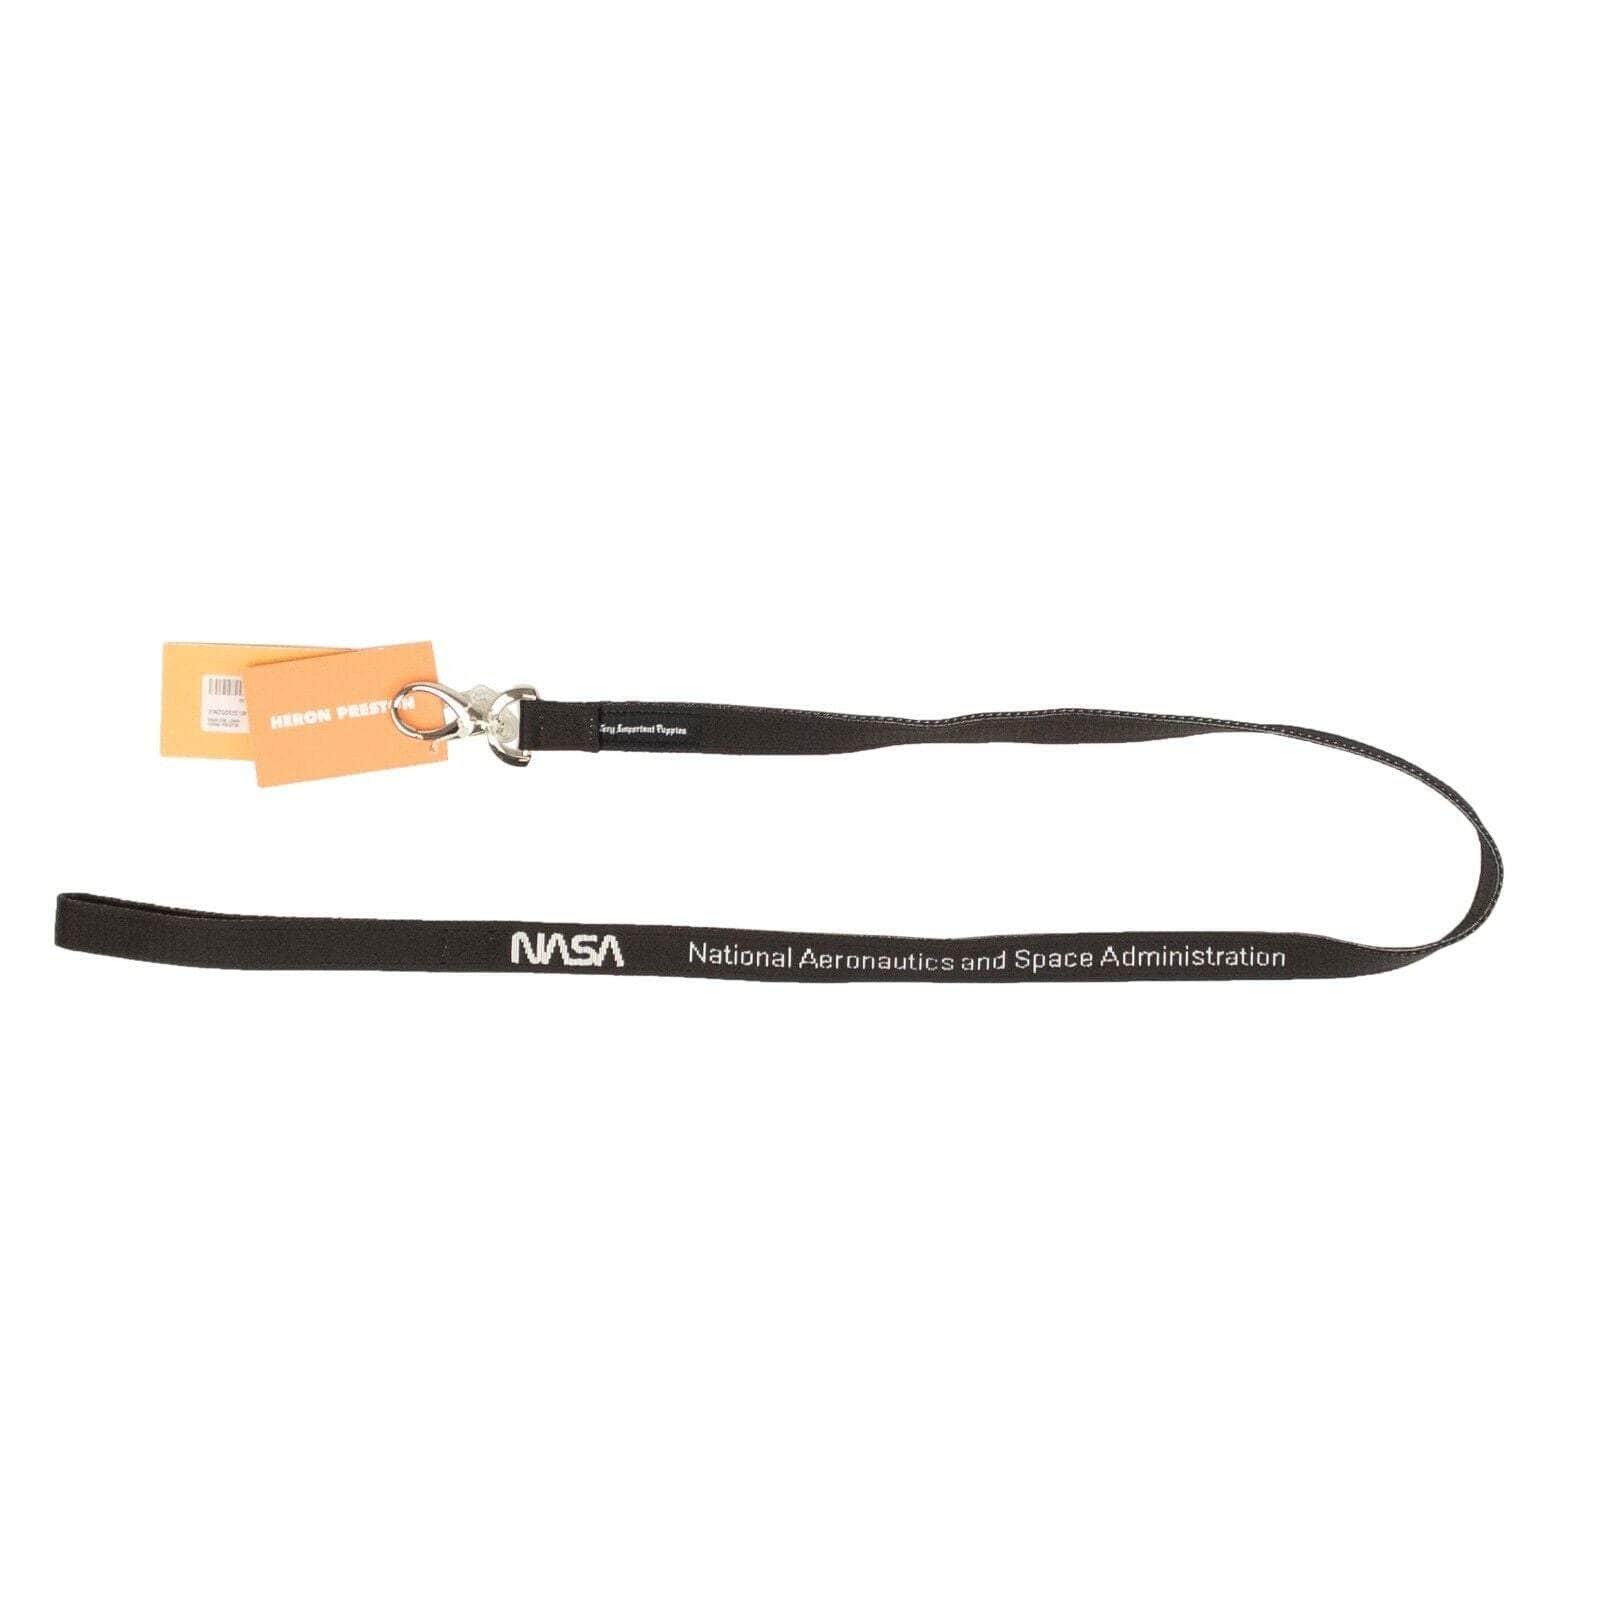 Heron Preston channelenable-all, chicmi, couponcollection, gender-mens, gender-womens, heron-preston, main-accessories, mens-shoes, pet-accessories, shop375, size-os, under-250 OS Black NASA Logo Dog Leash HRP-XACC-0001/OS HRP-XACC-0001/OS